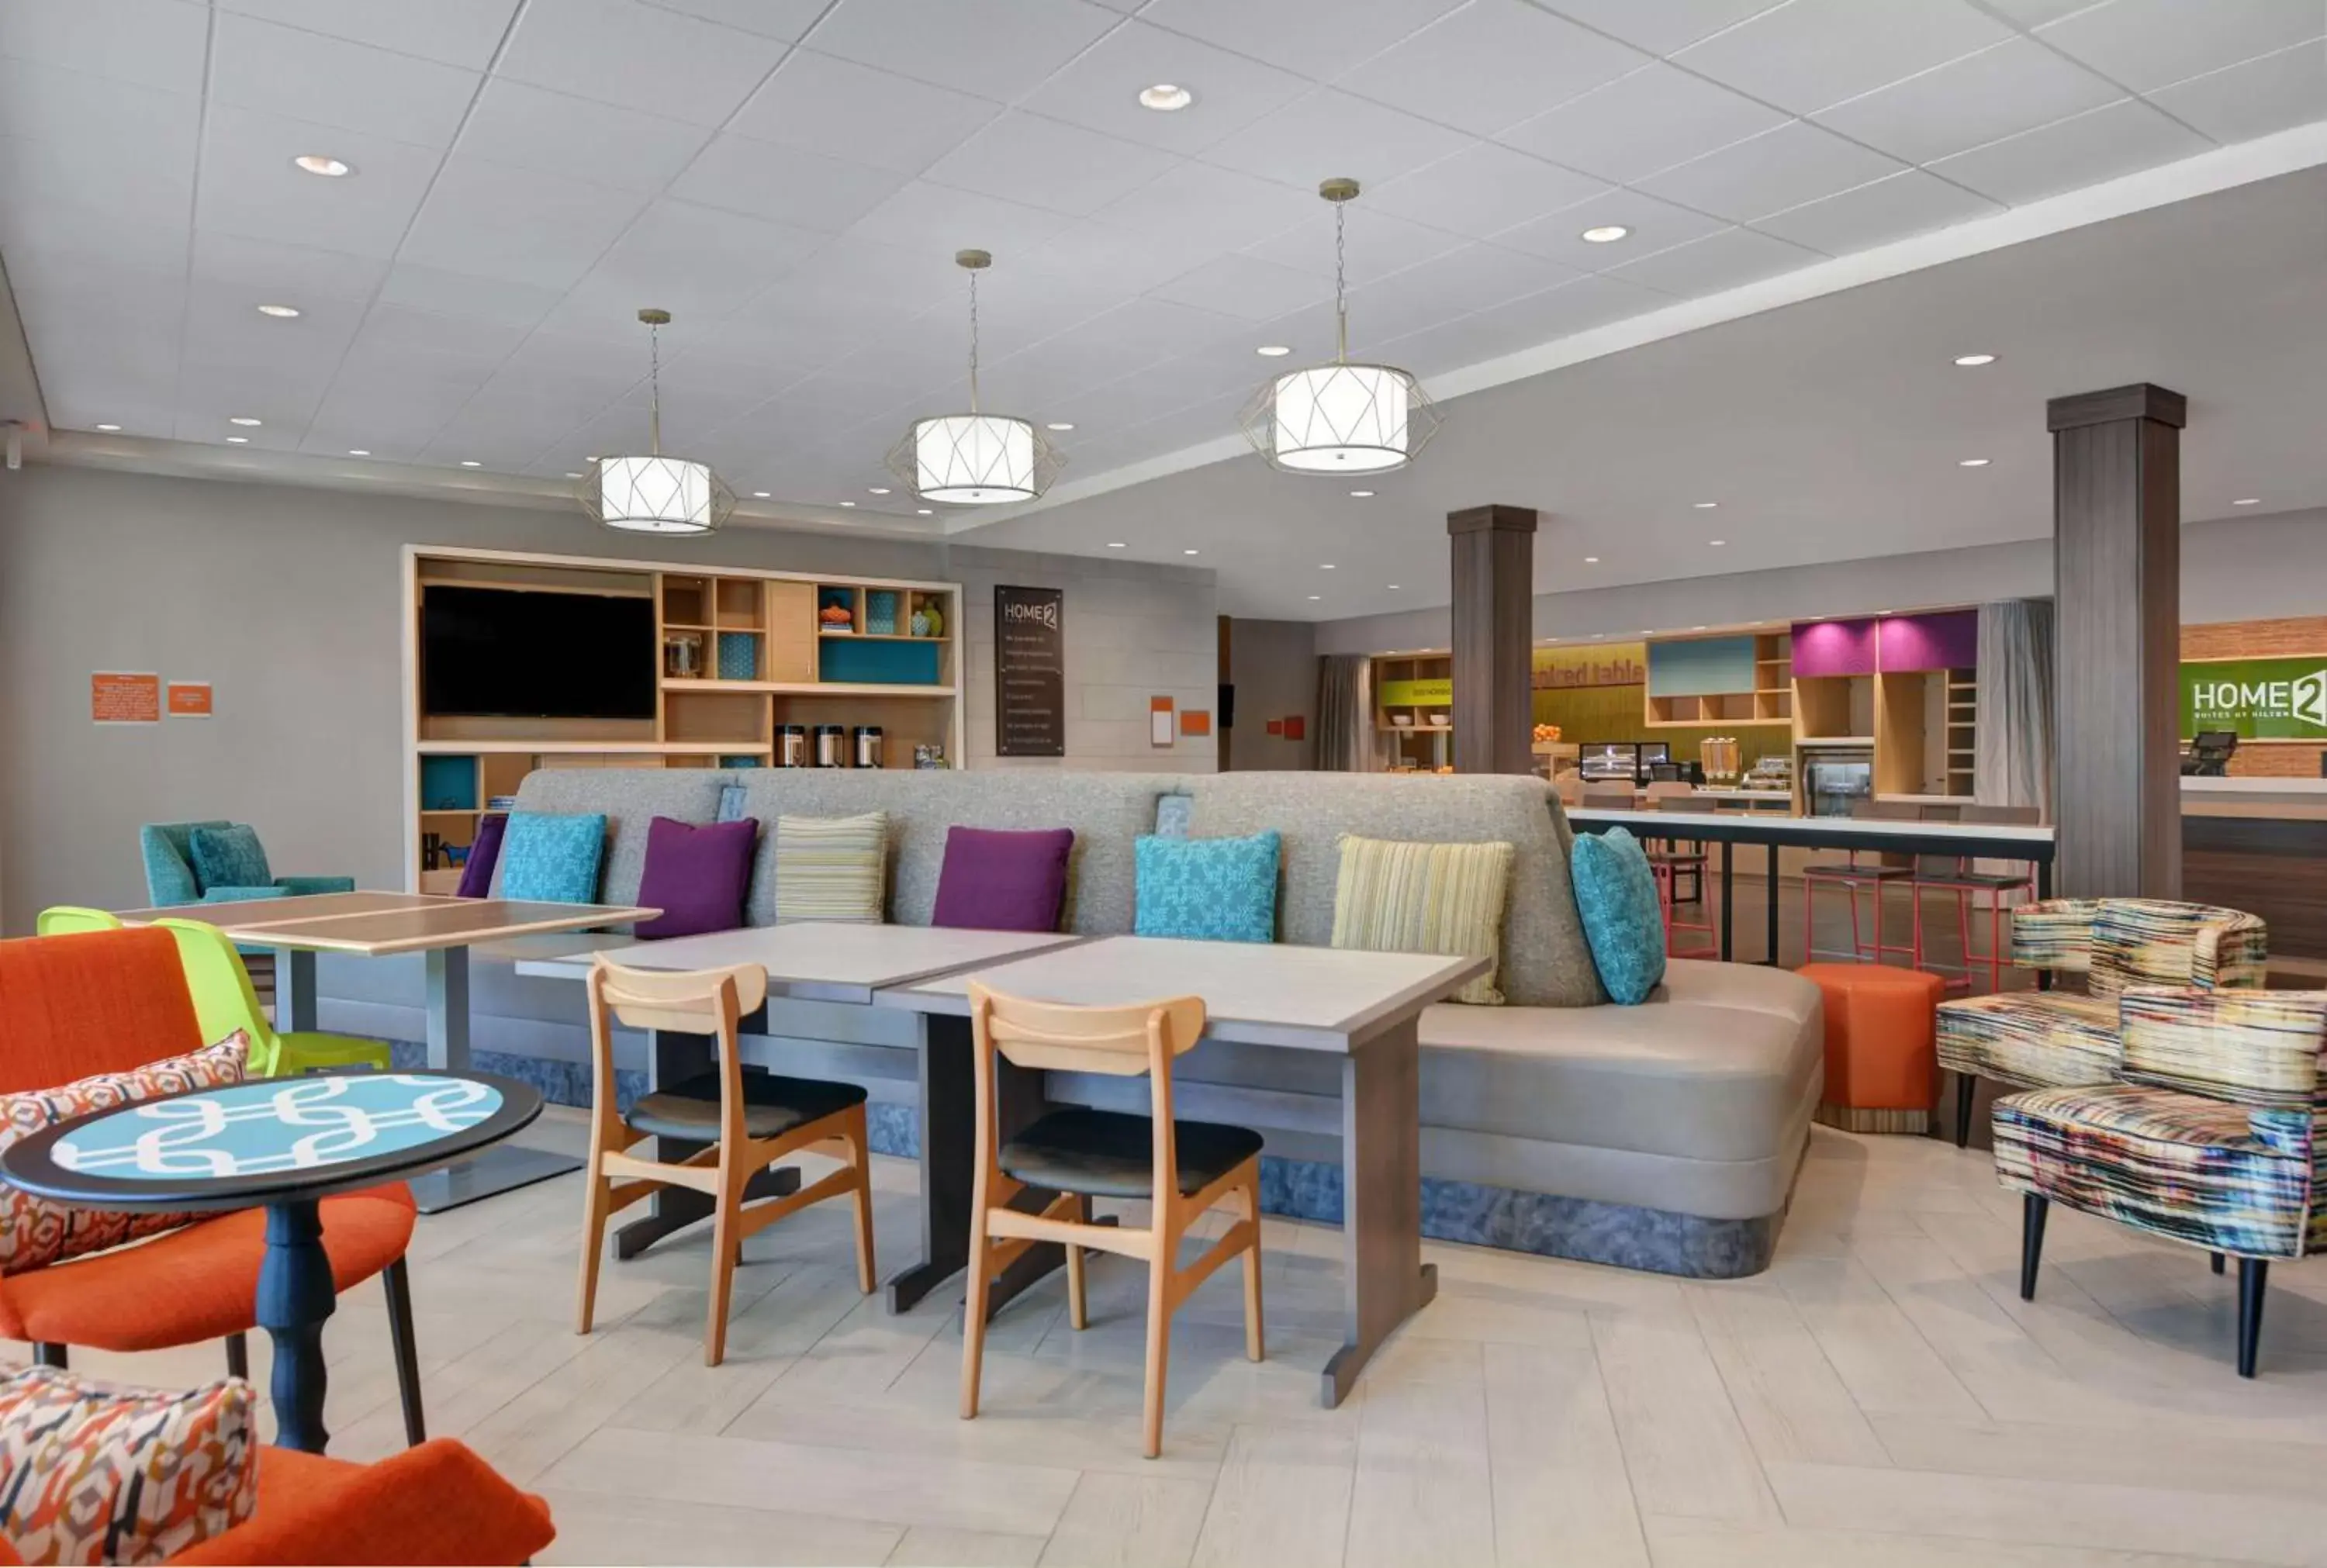 Lobby or reception in Home2 Suites By Hilton Panama City Beach, Fl